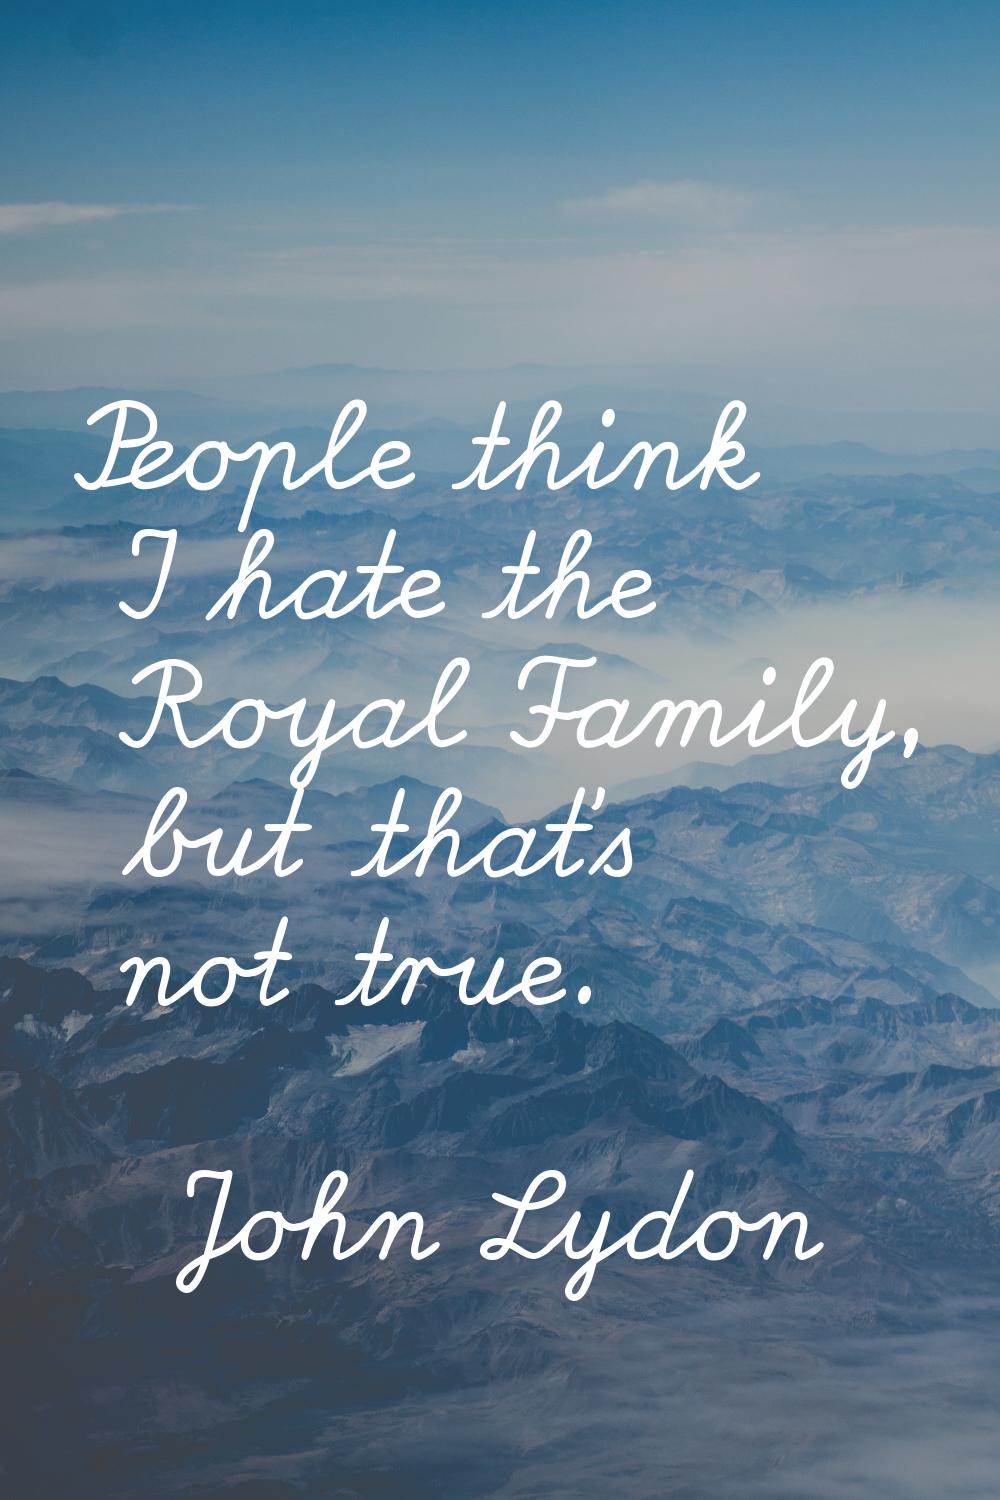 People think I hate the Royal Family, but that's not true.